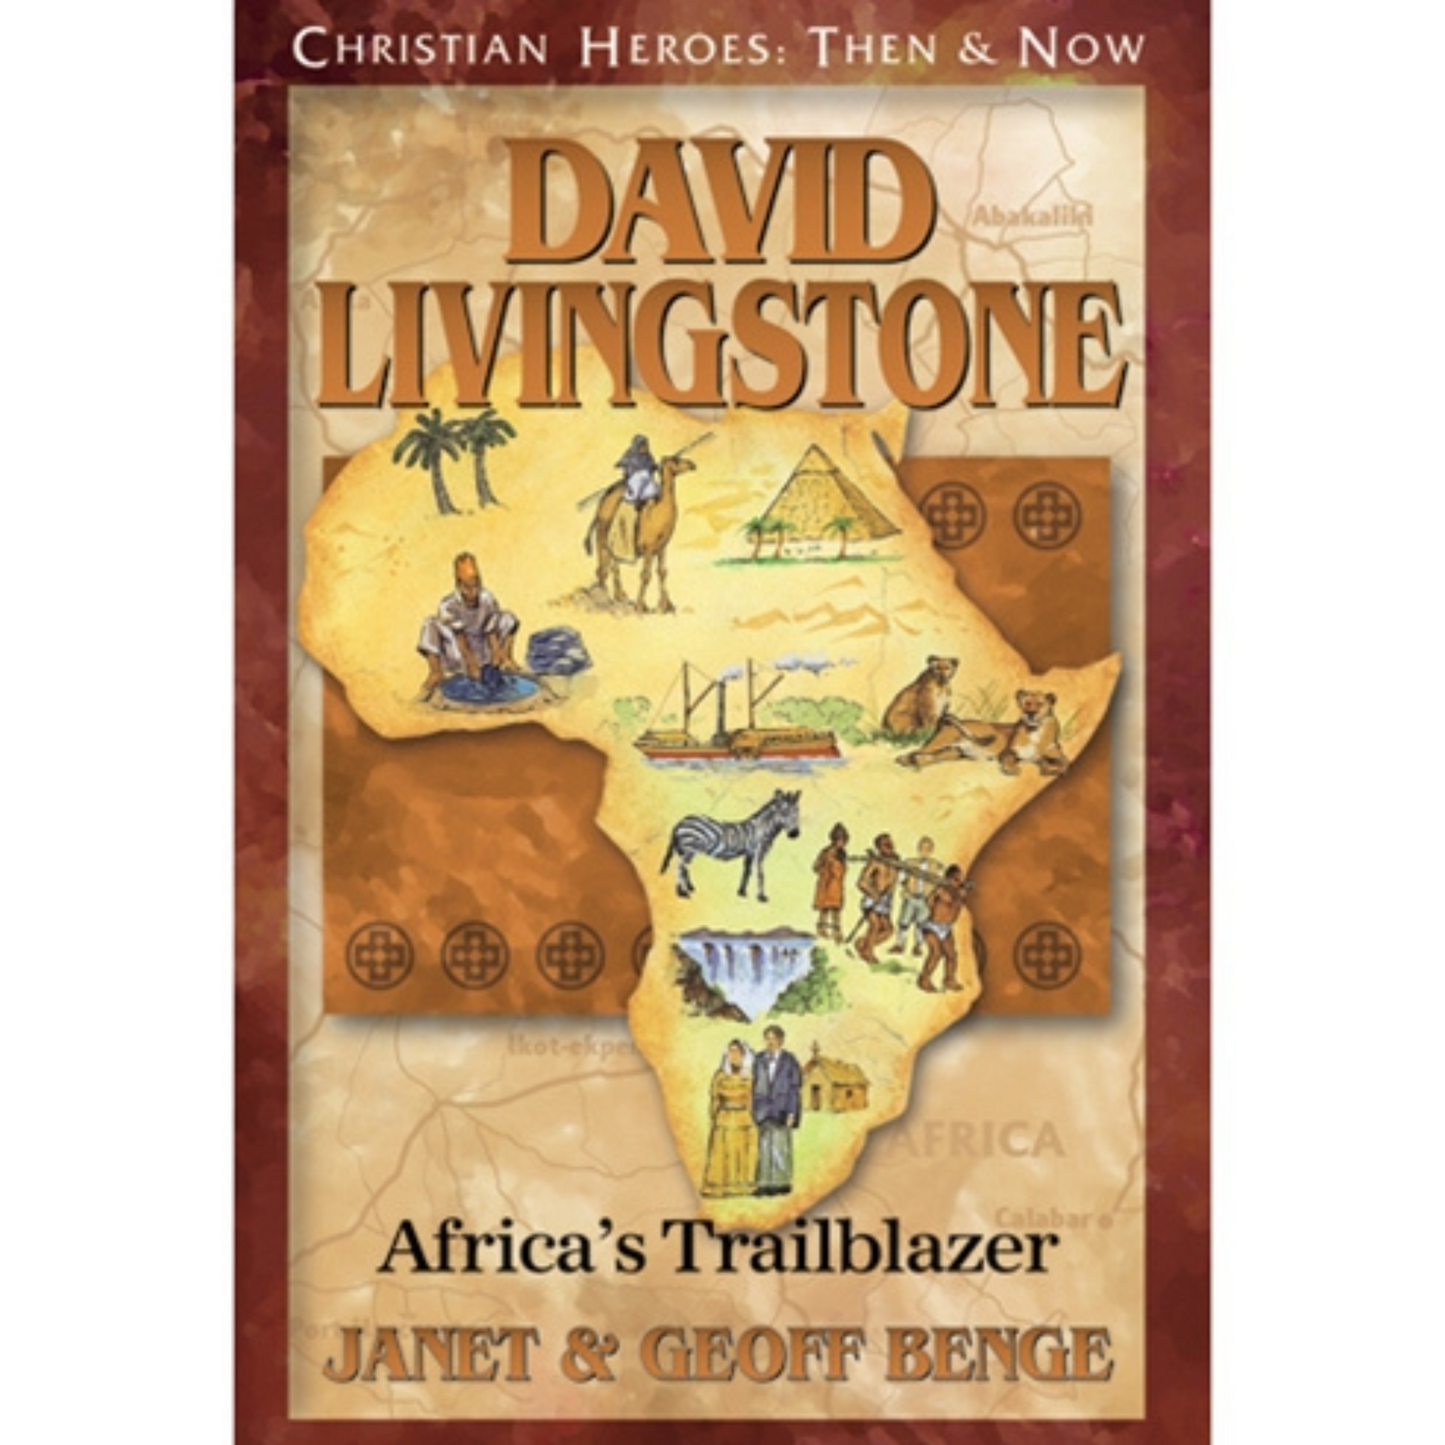 CHRISTIAN HEROES: THEN & NOW : David Livingstone